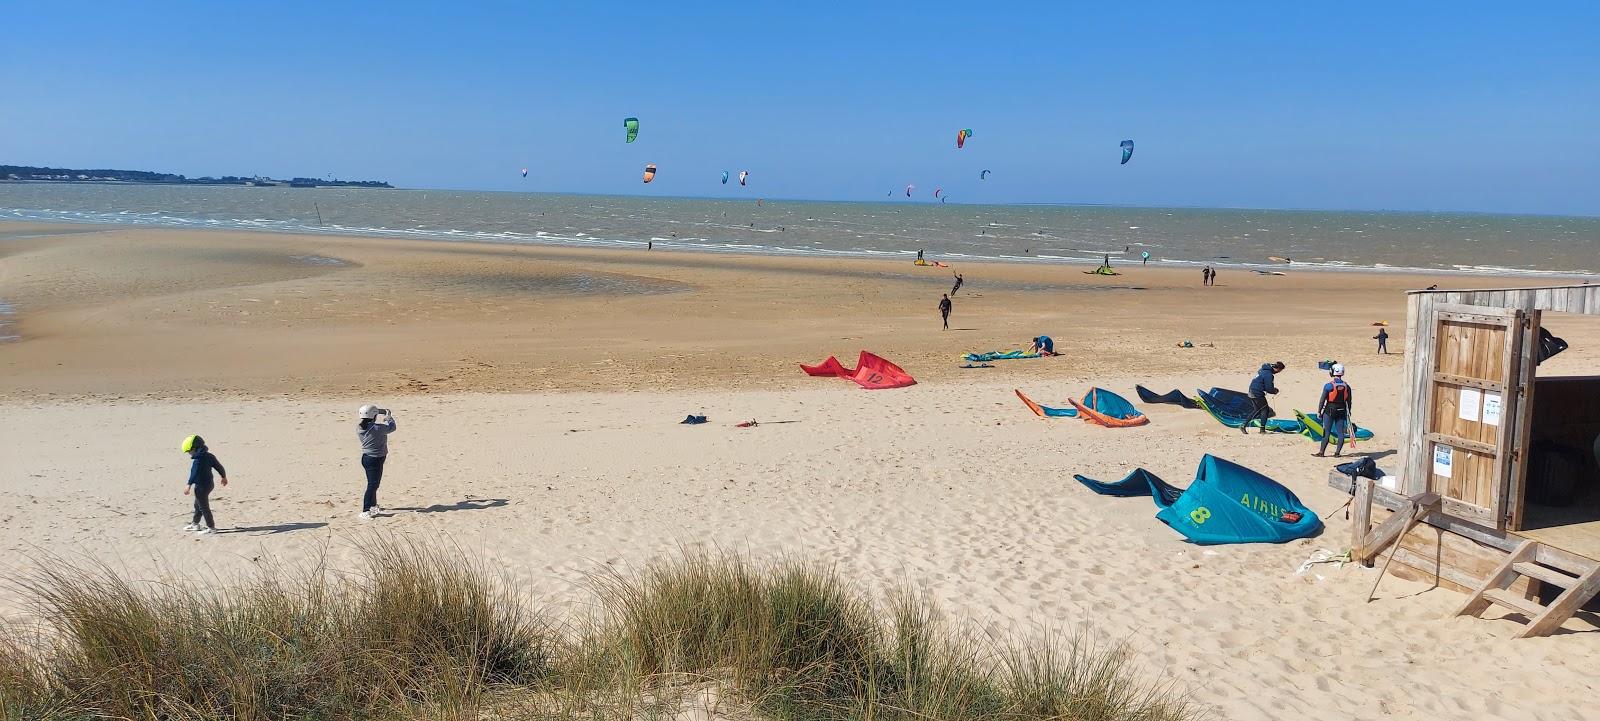 Photo of Rivedoux-Plage Nord - popular place among relax connoisseurs